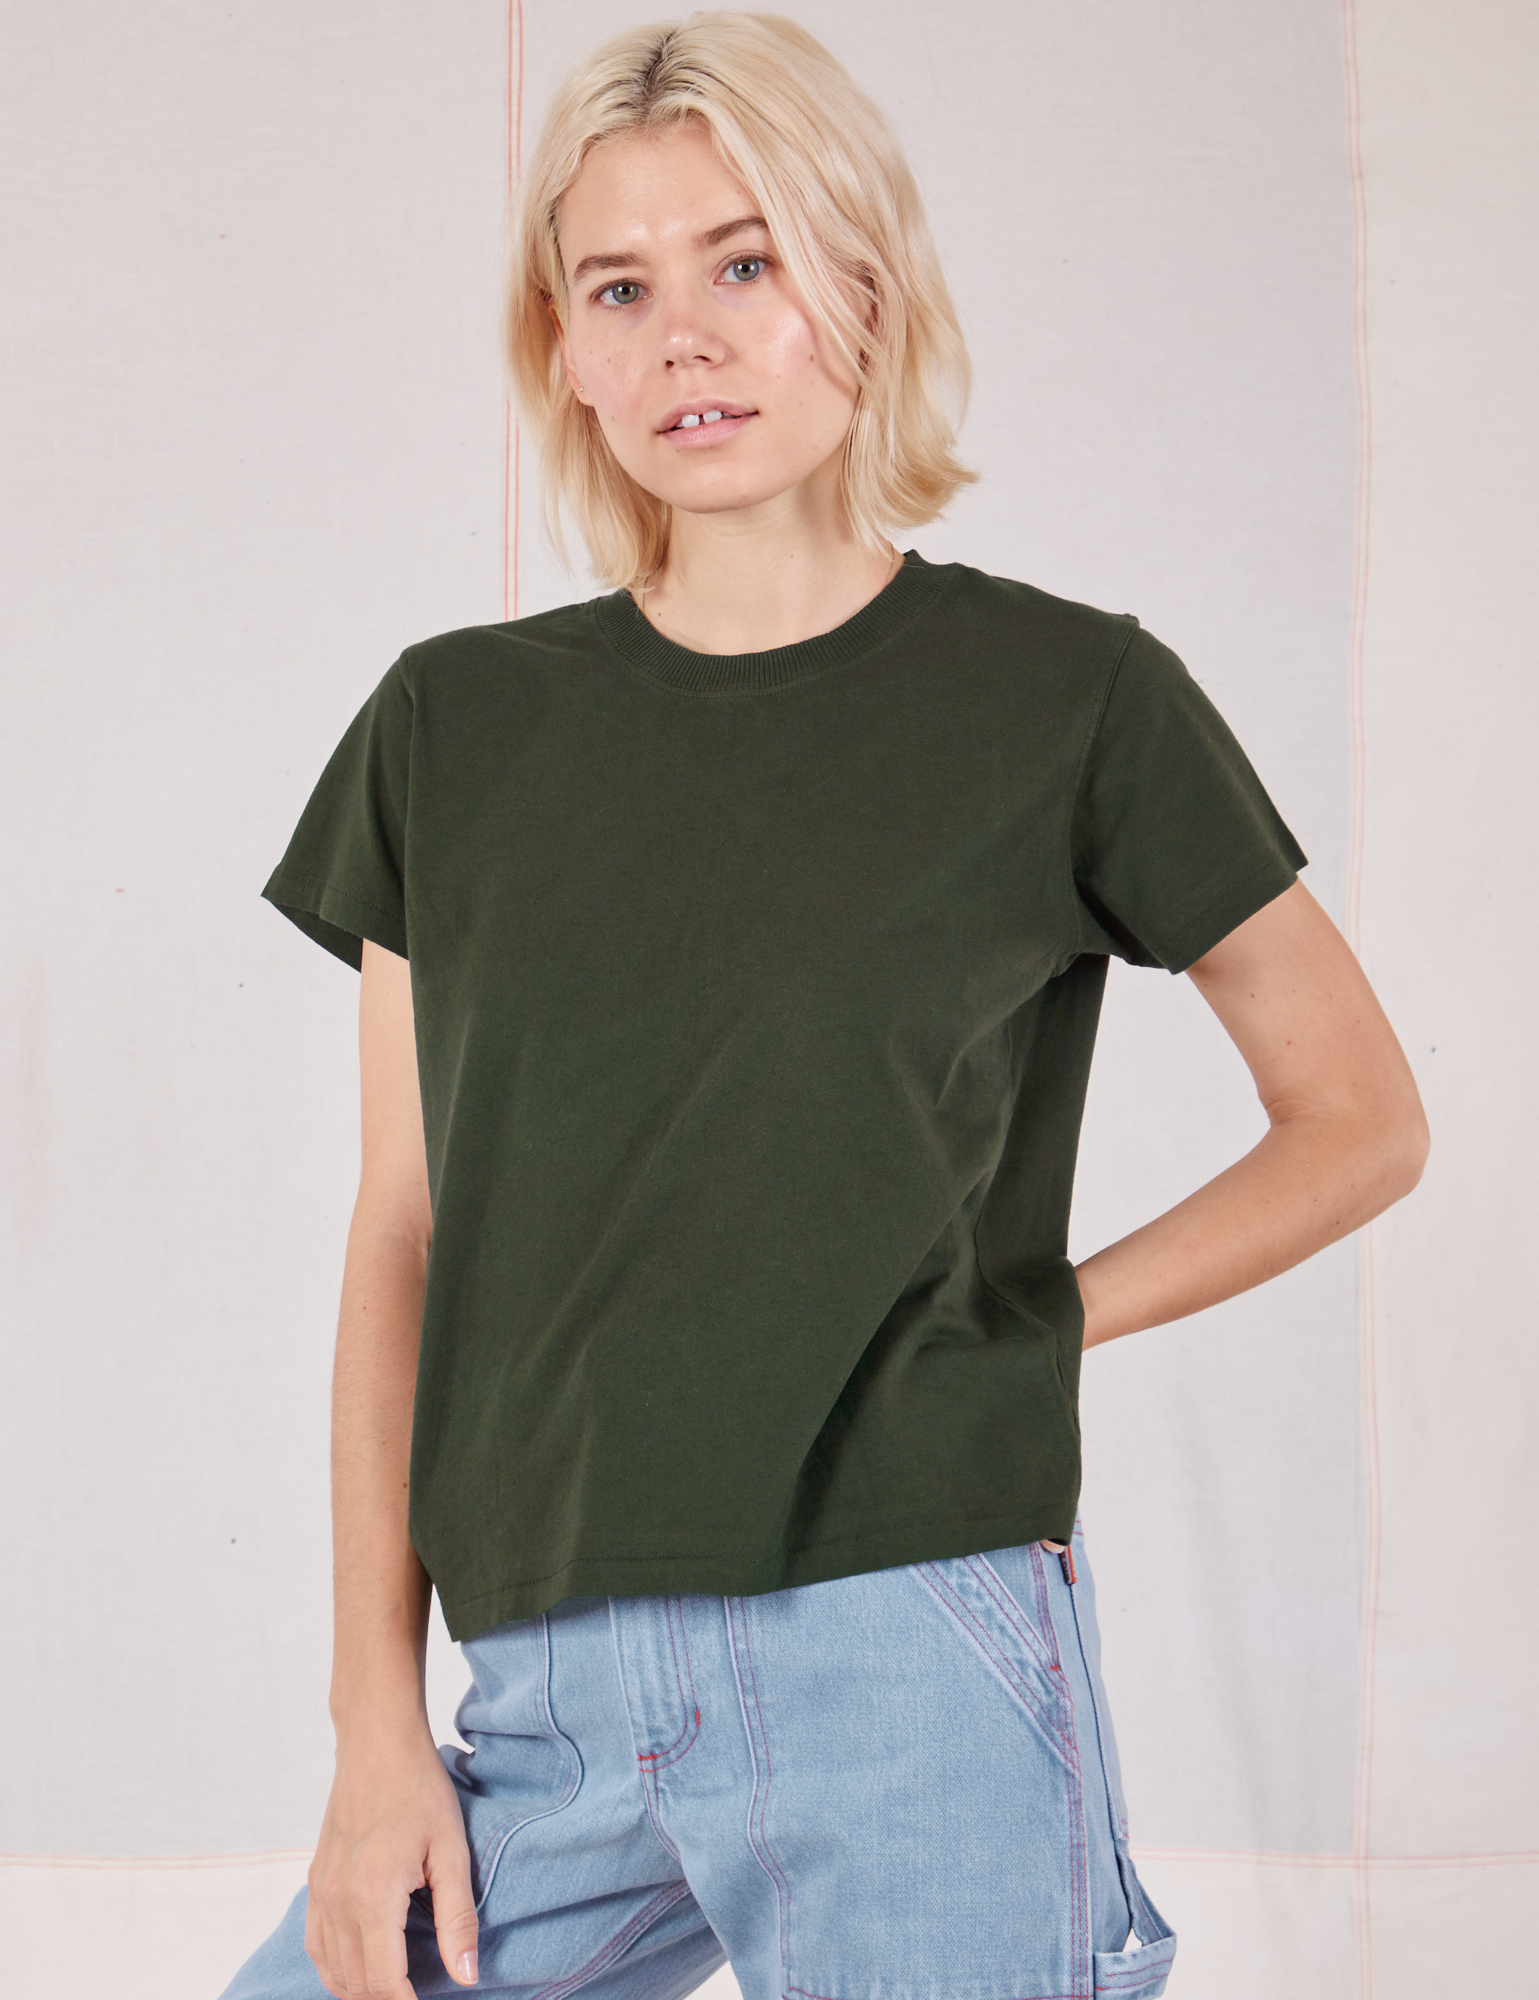 Madeline is 5'9" and wearing P Organic Vintage Tee in Swamp Green